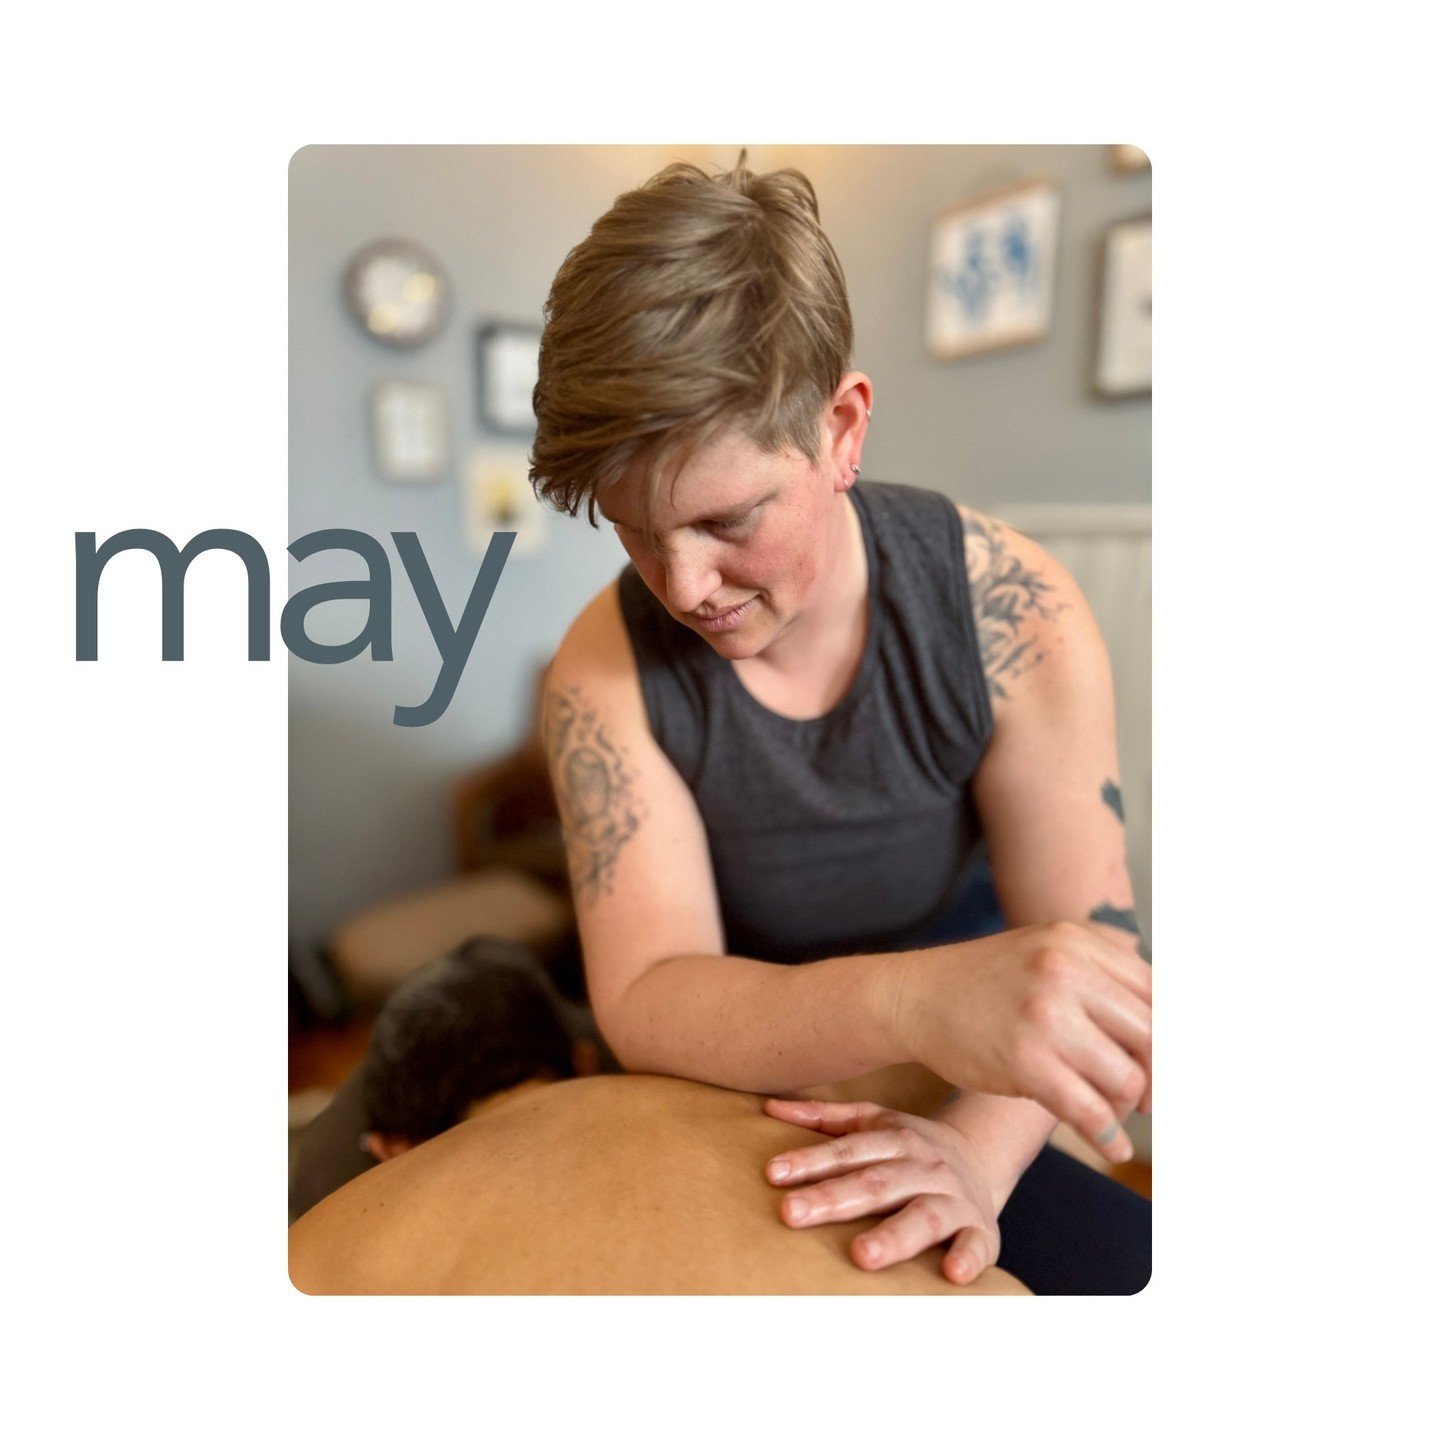 Happy May! Prep your body for those summer adventures with a massage!
.
You can now book ~2 months in advance with me in Madison, so I recommend planning ahead so you can snag your favorite spot! New client special appointments available through 5/15